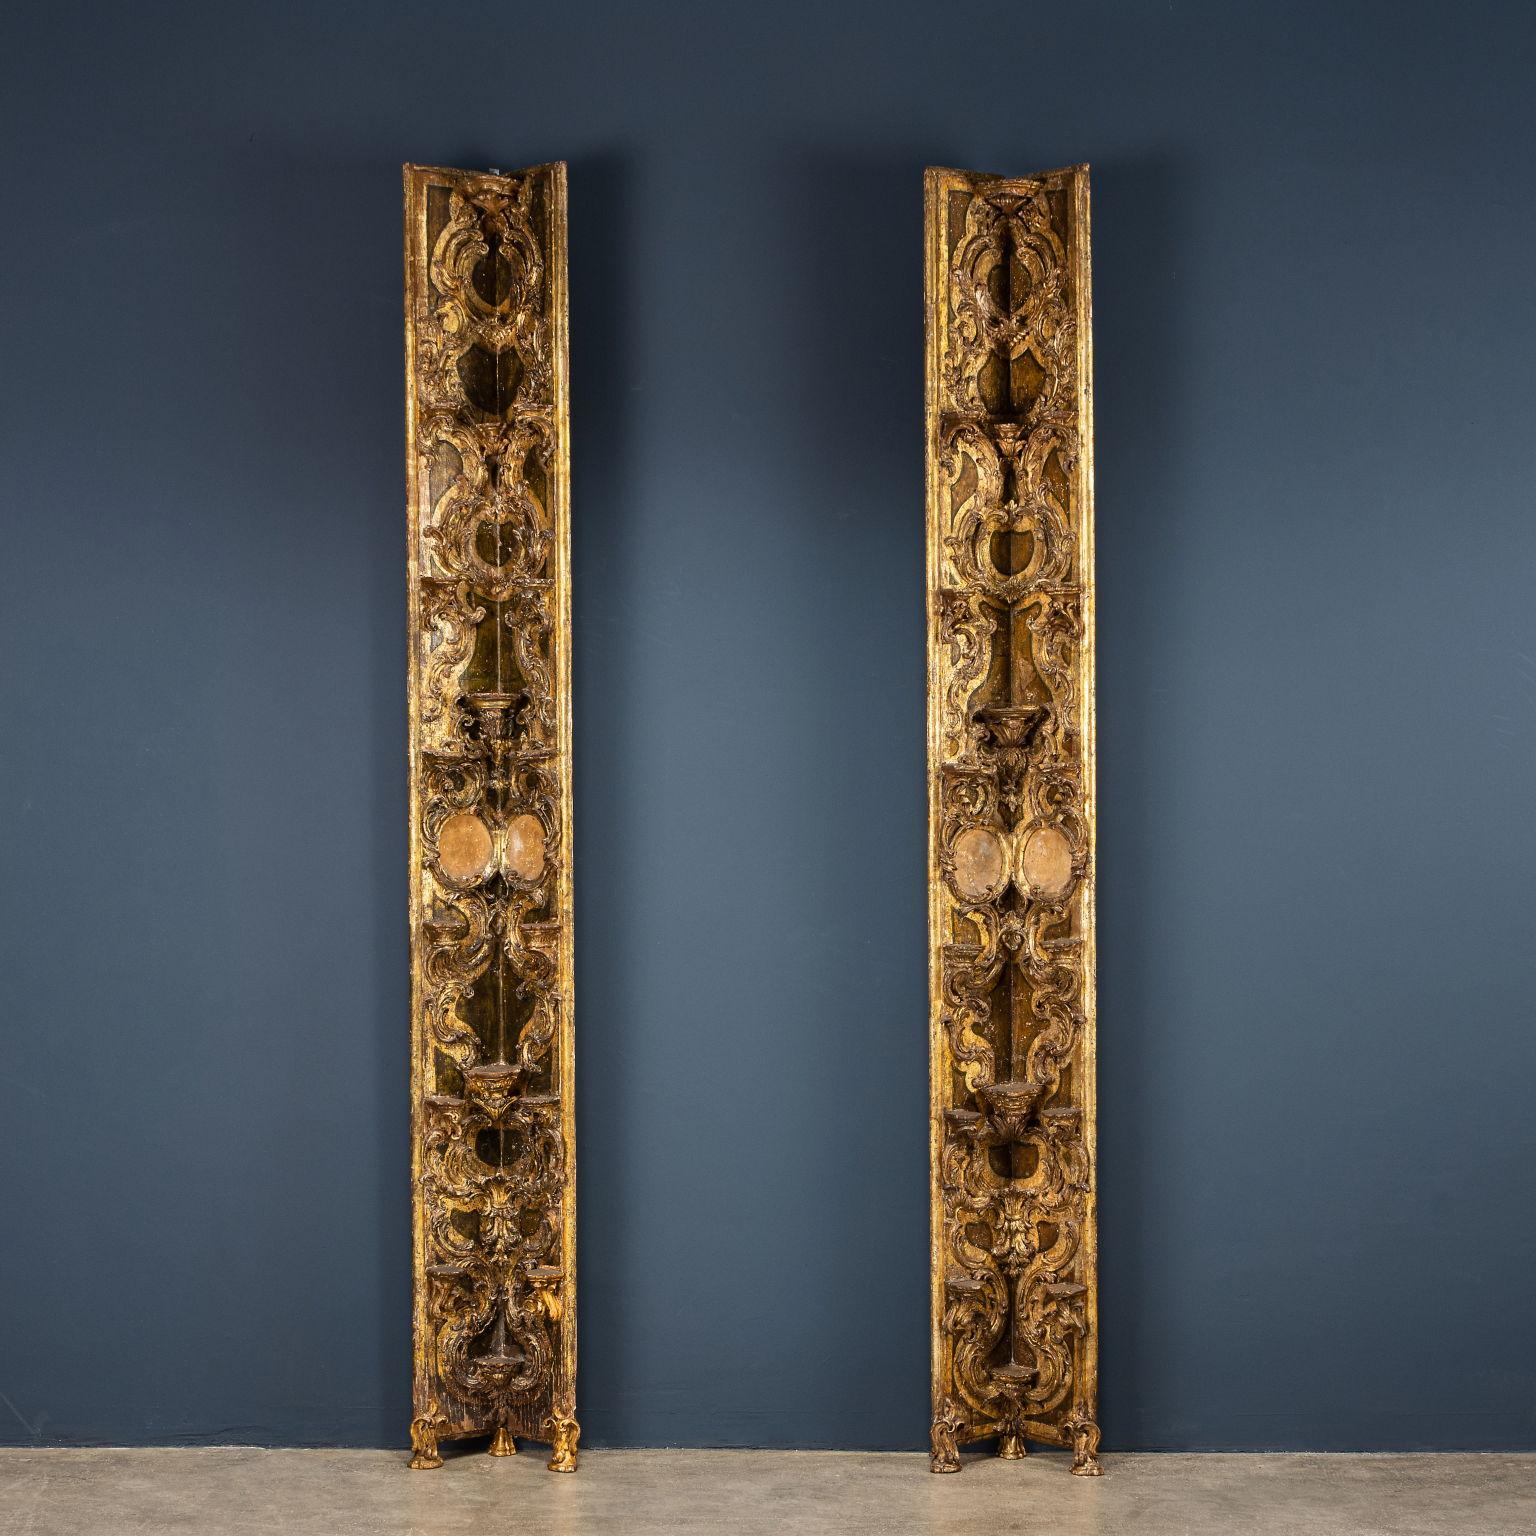 Pair of carved corner pilasters holding a porcelain collection; supported by three carved feet, they develop on the entire surface a carving with leafy curls and flowers that act as a support for the shelves or as a support with a curl for the